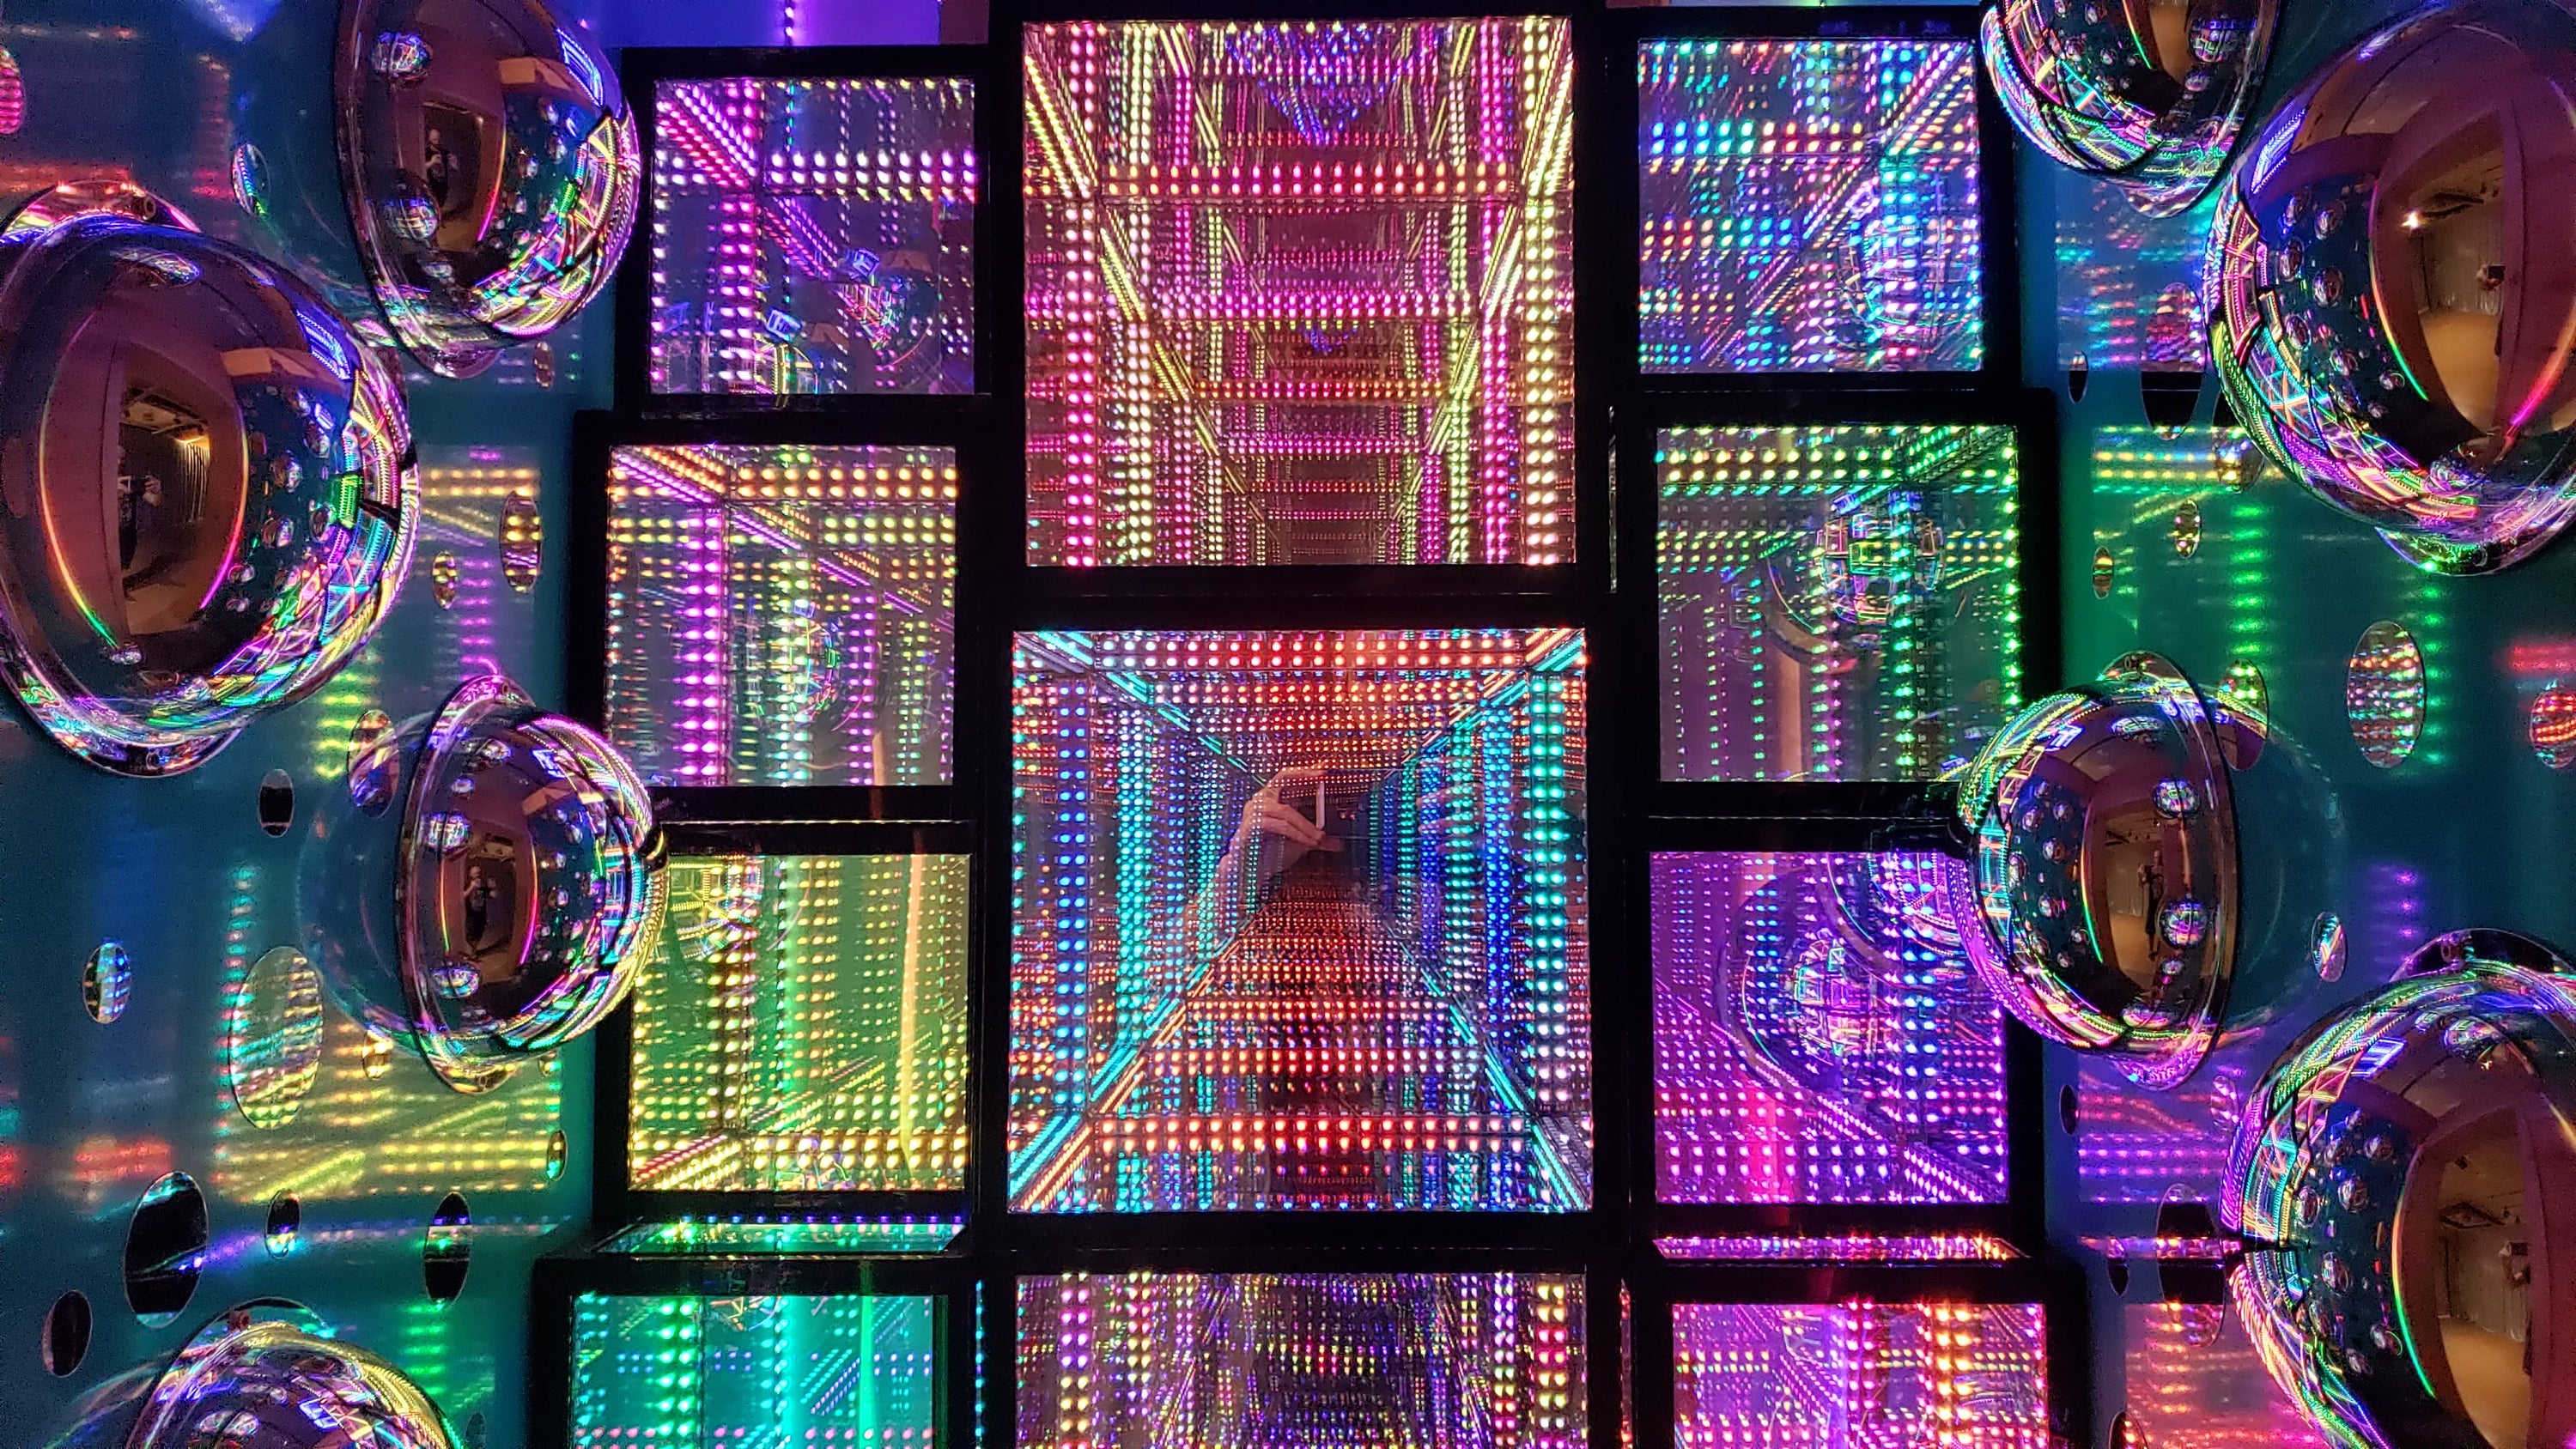 Multicolored Hypercubes with multicolored LED lights stacked upon each other, making a wall of cubes